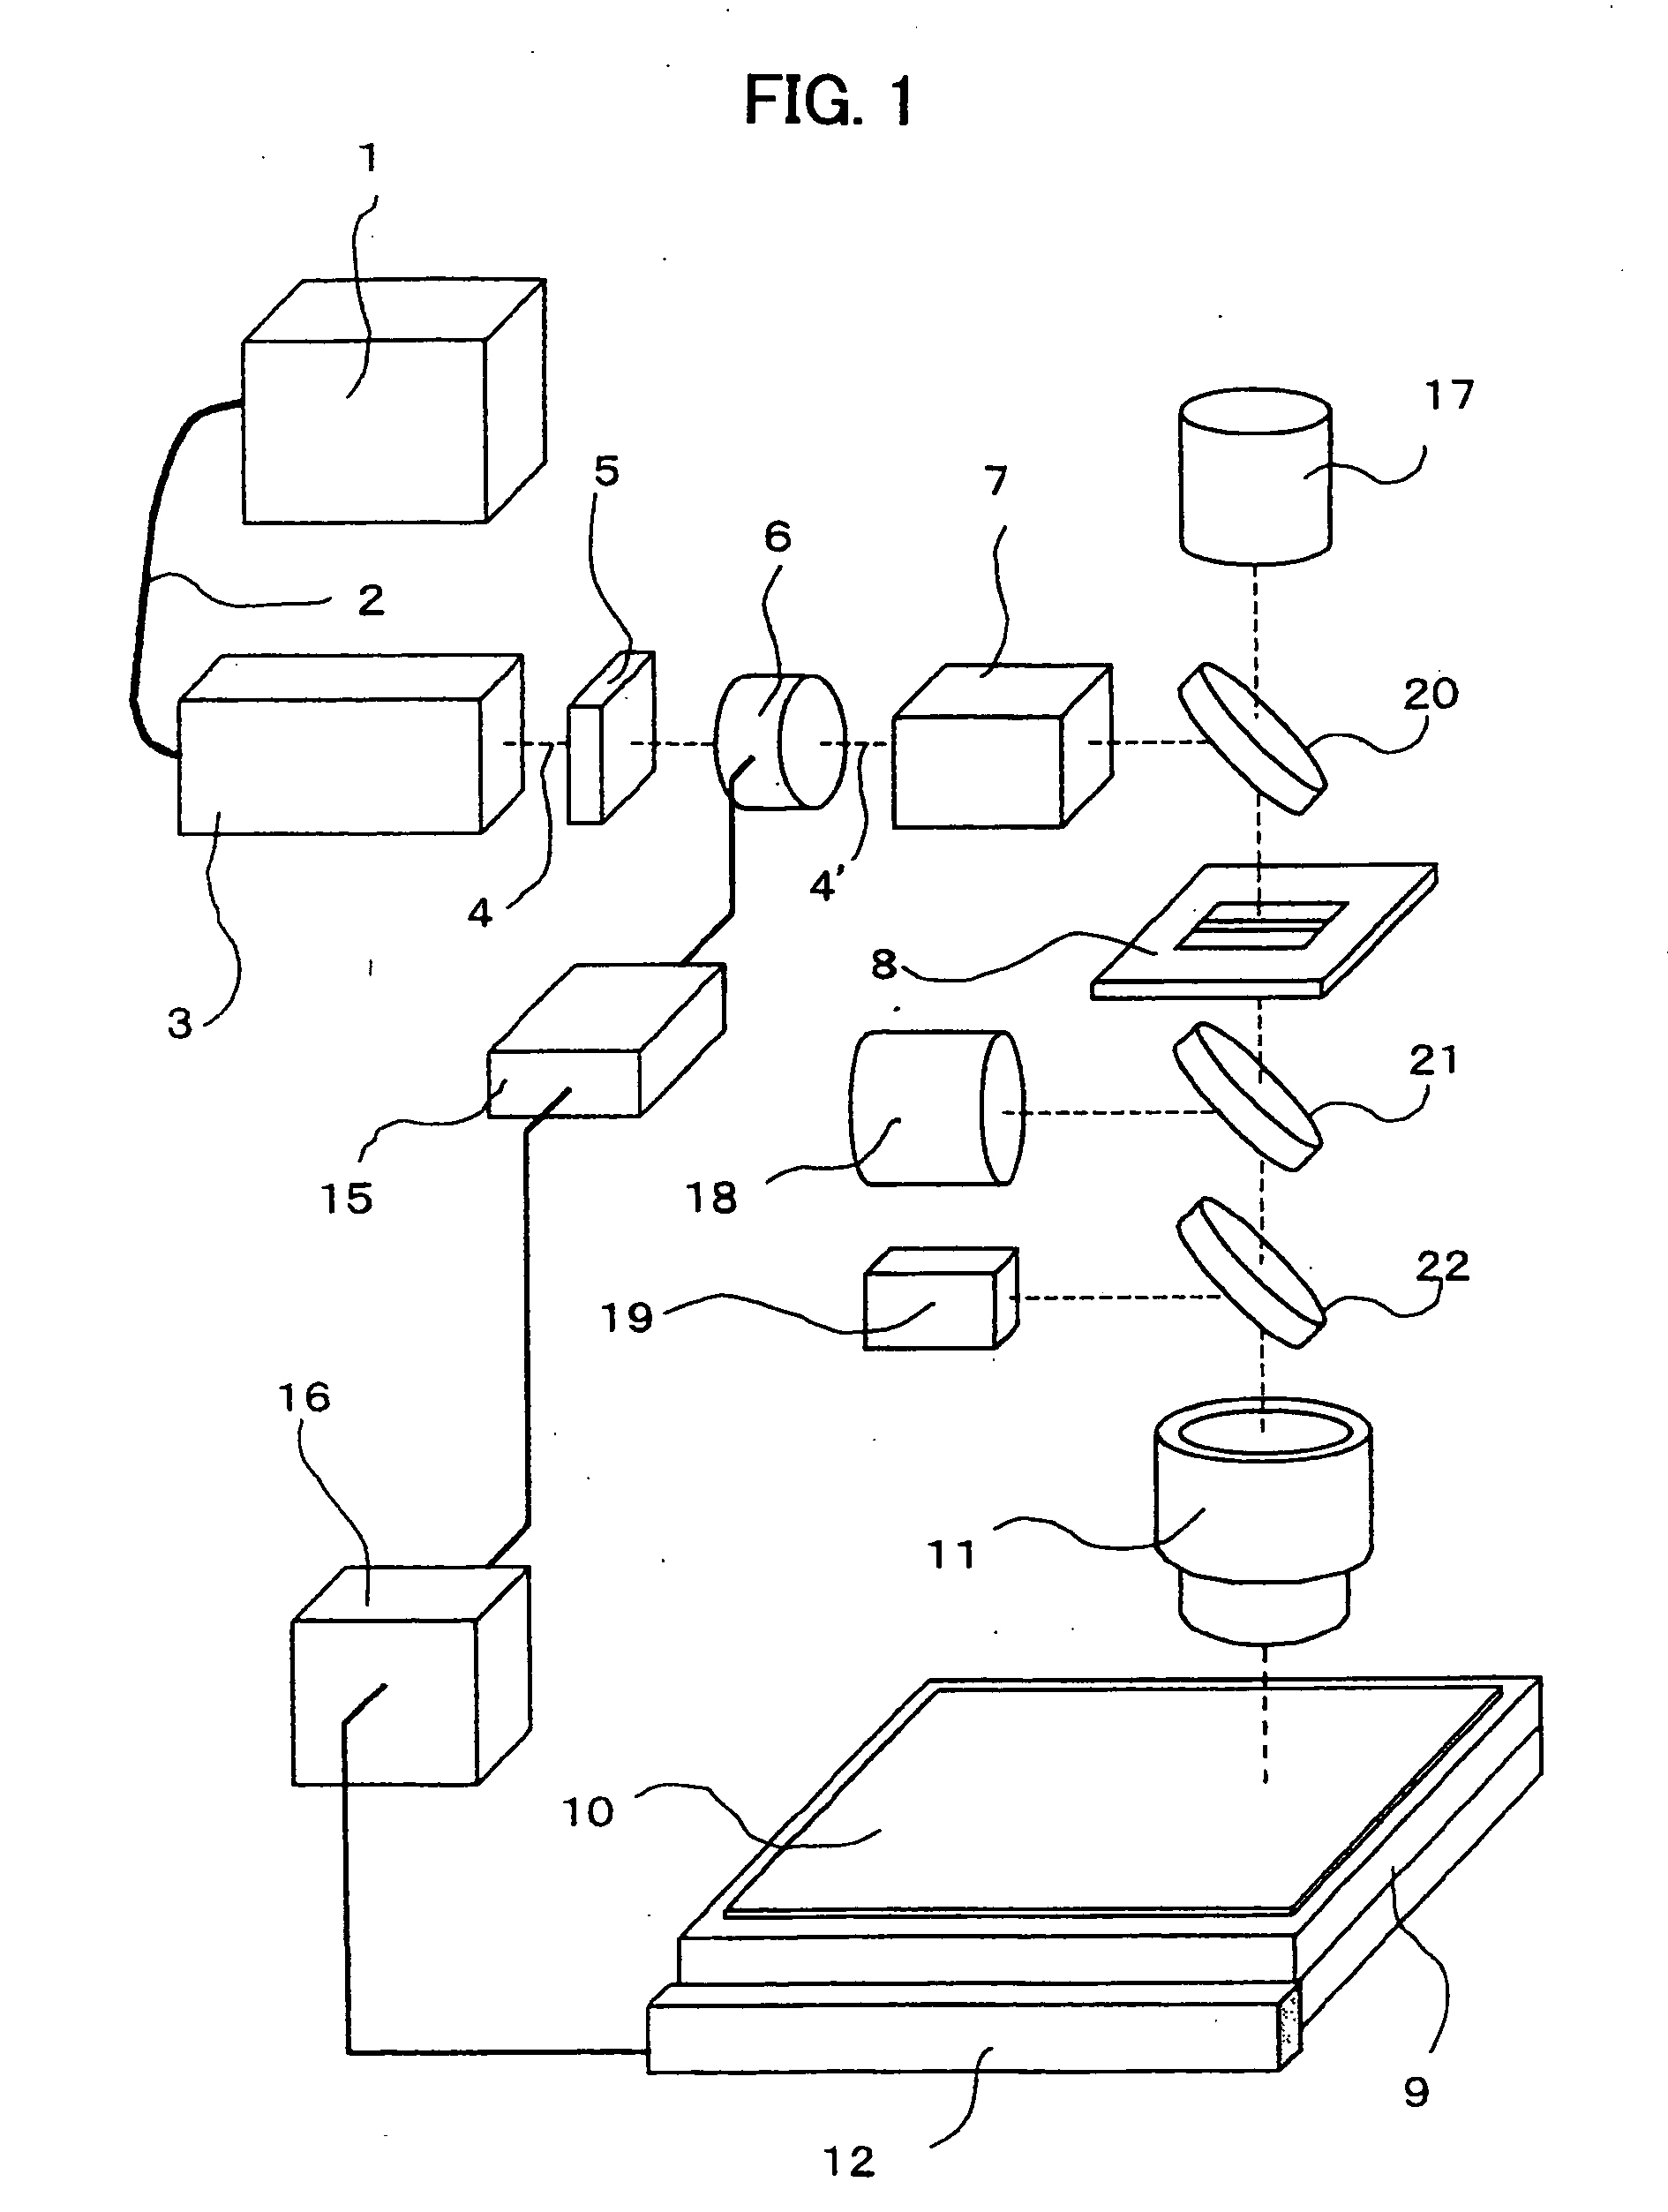 Display panel and method for manufacturing the same